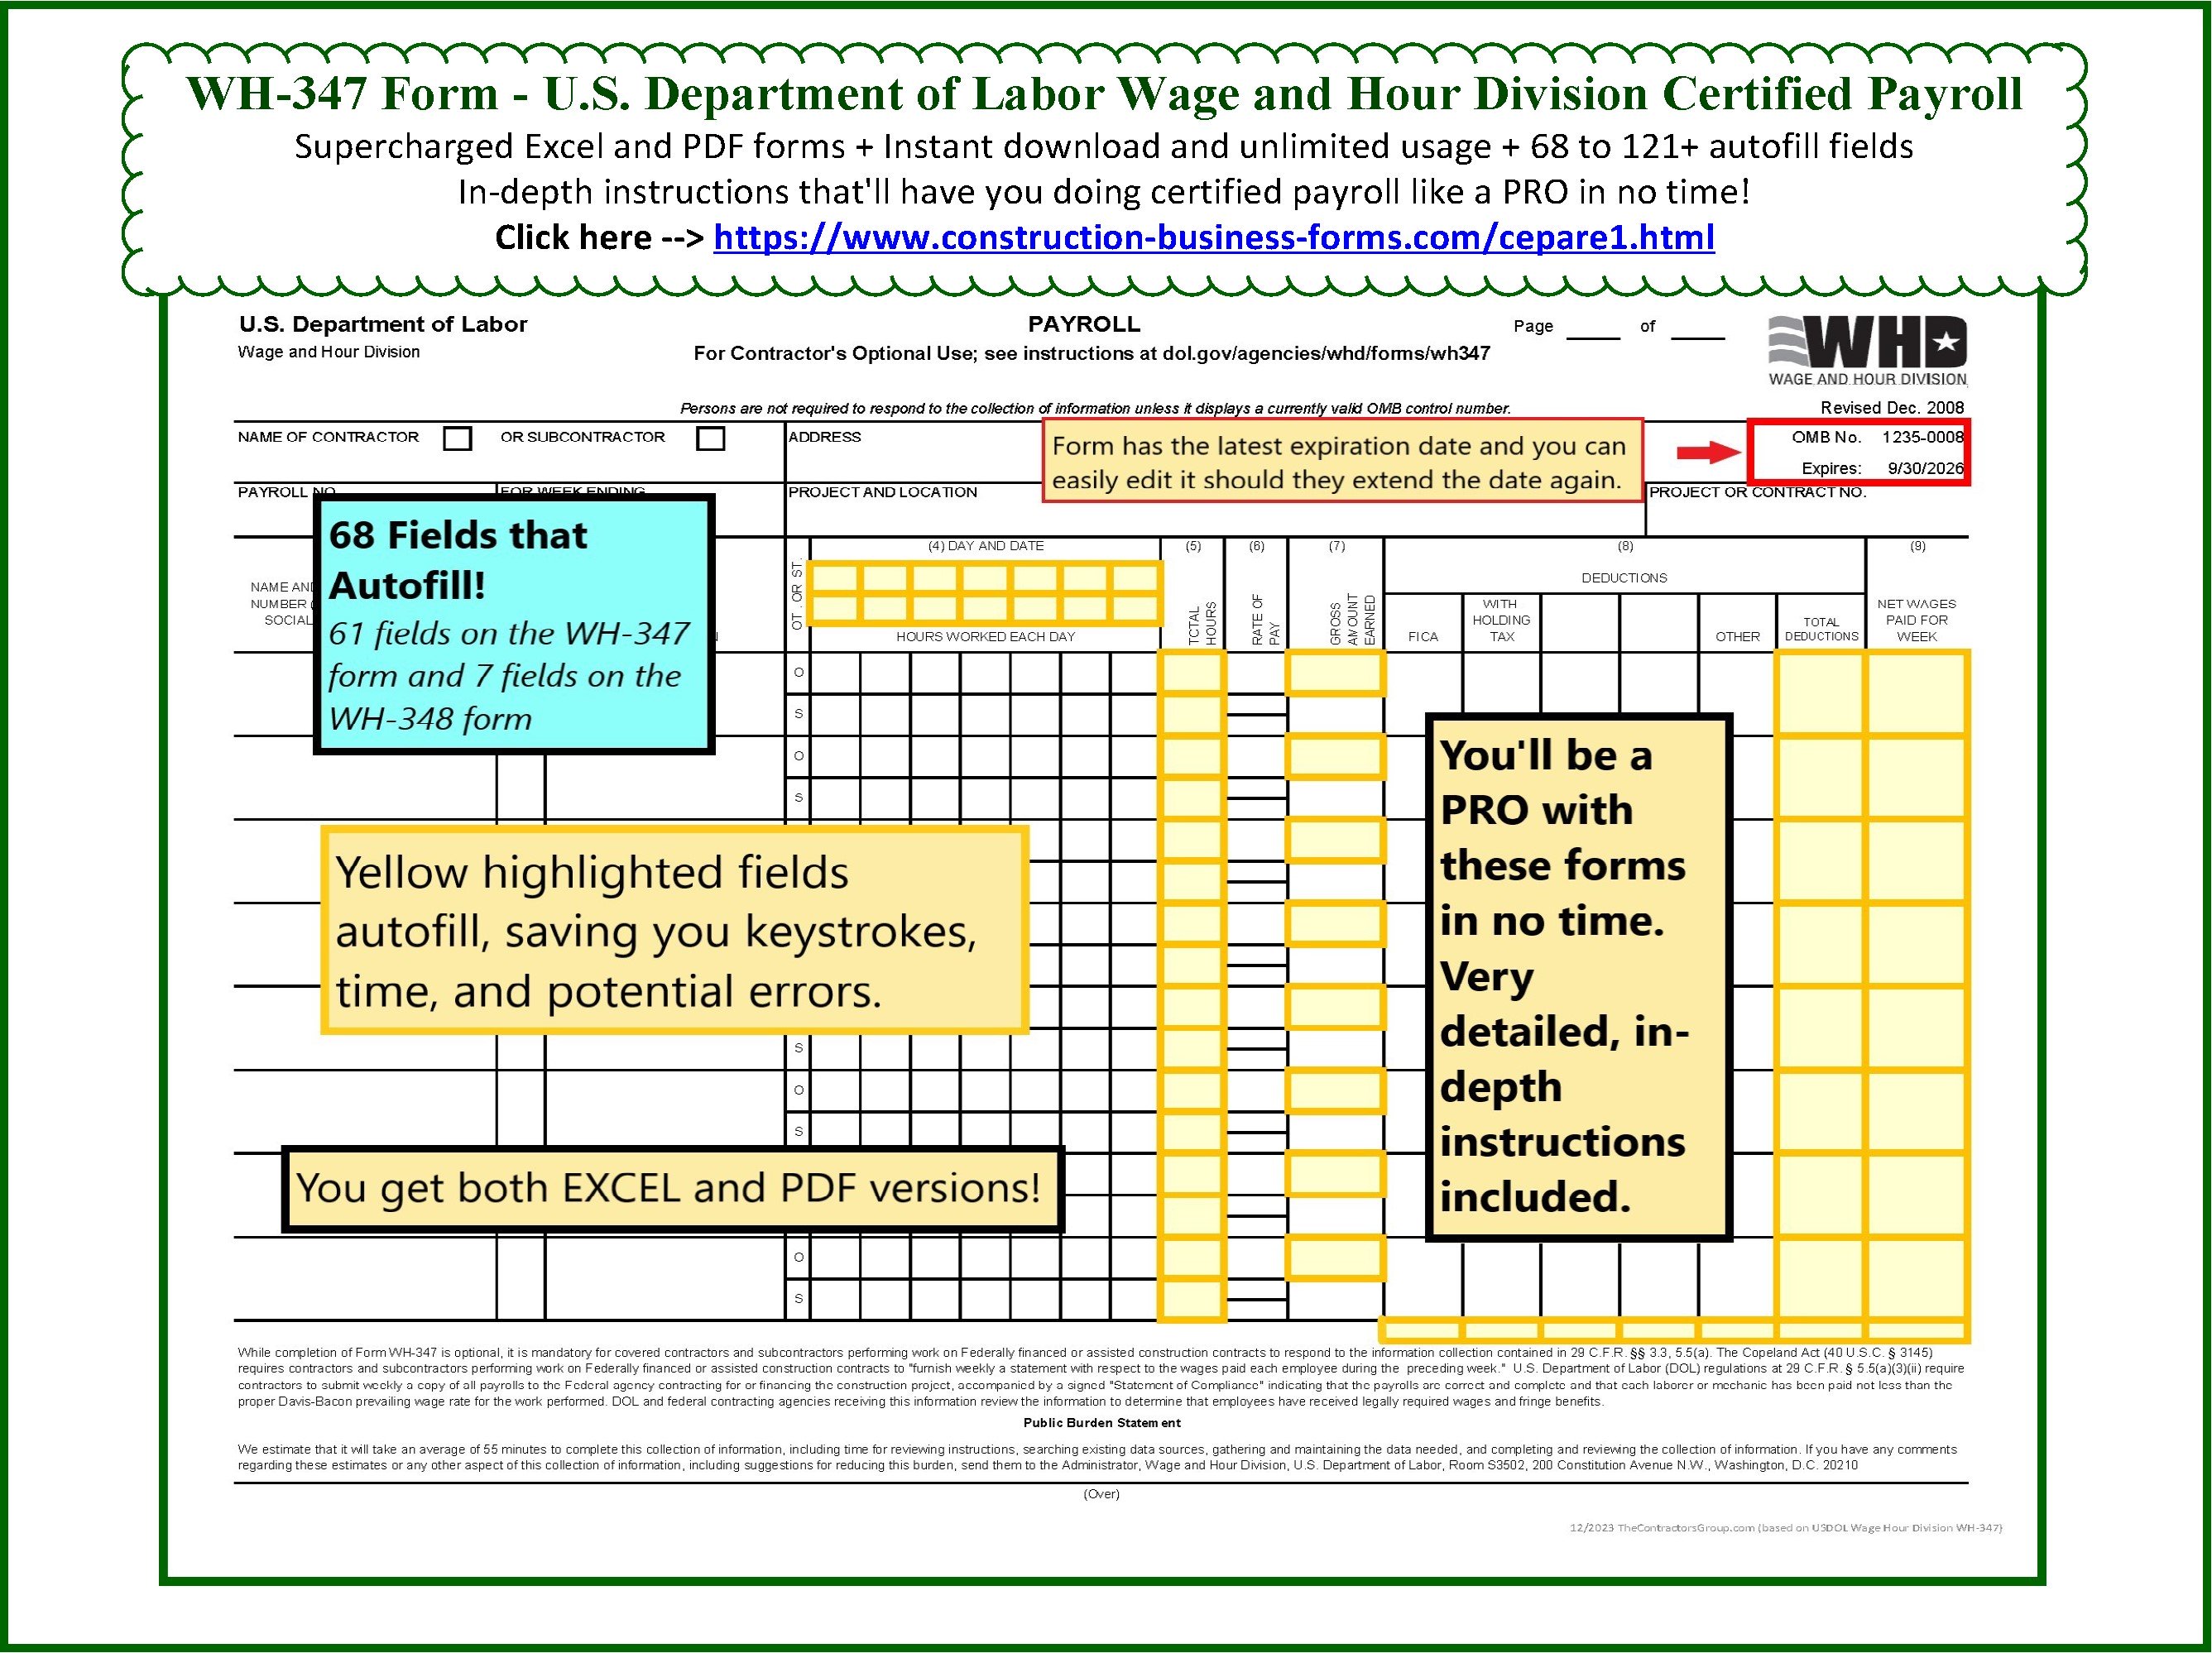 WH-347 form can be purchased at www.Construction-Business-Forms.com